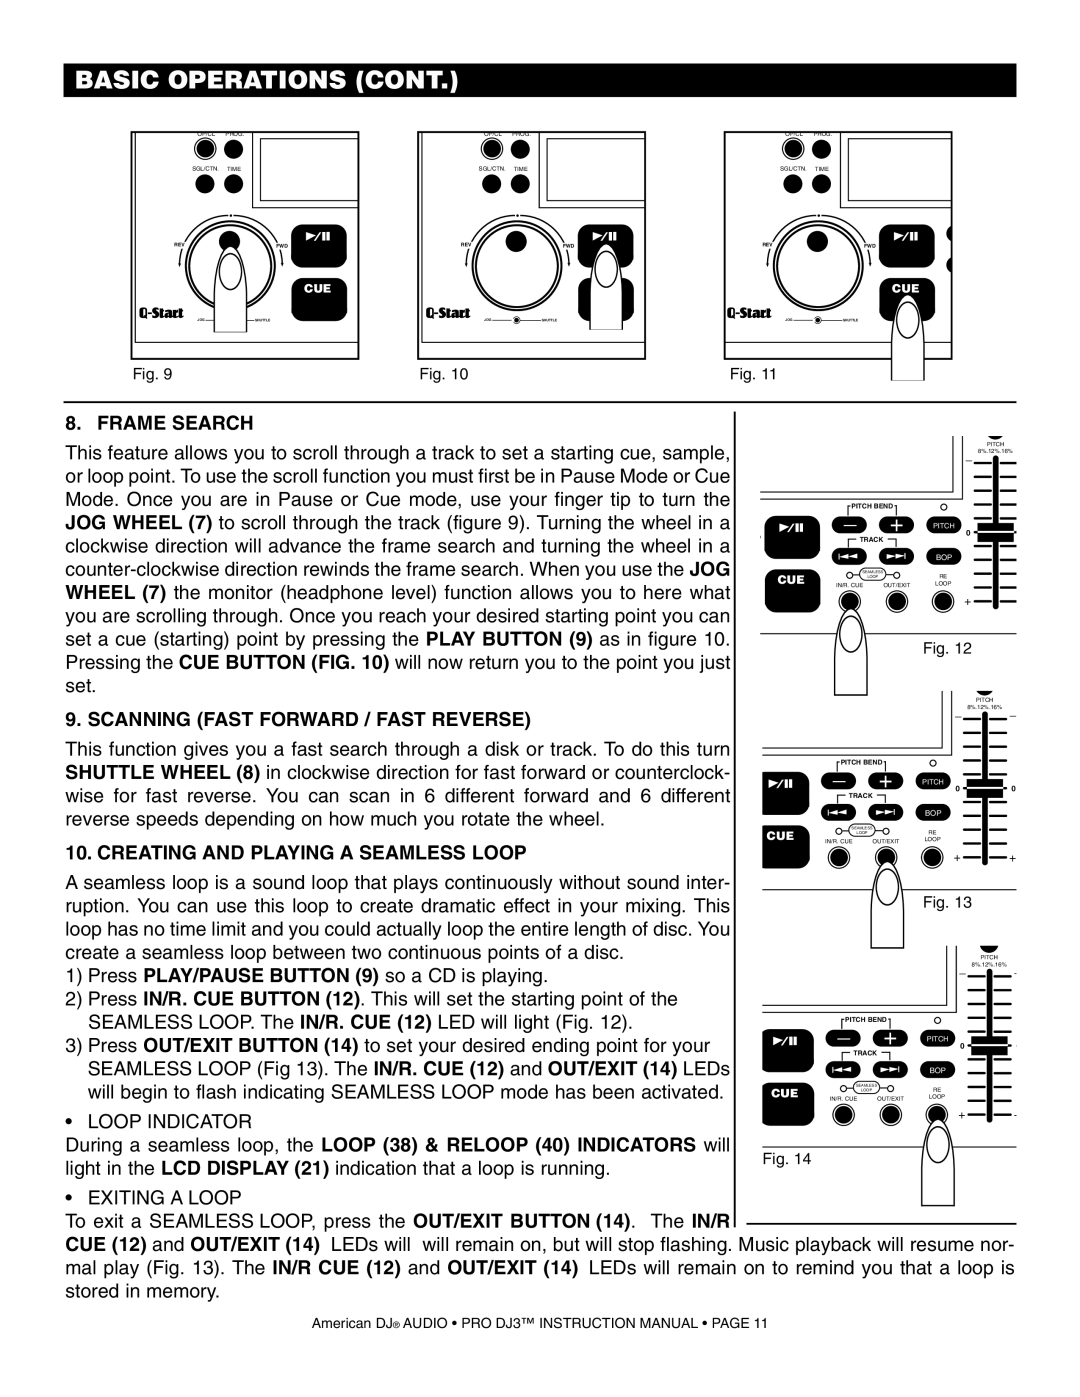 American Audio PRO DJ 3 manual Basic Operations Cont, Frame Search, Scanning Fast Forward / Fast Reverse 